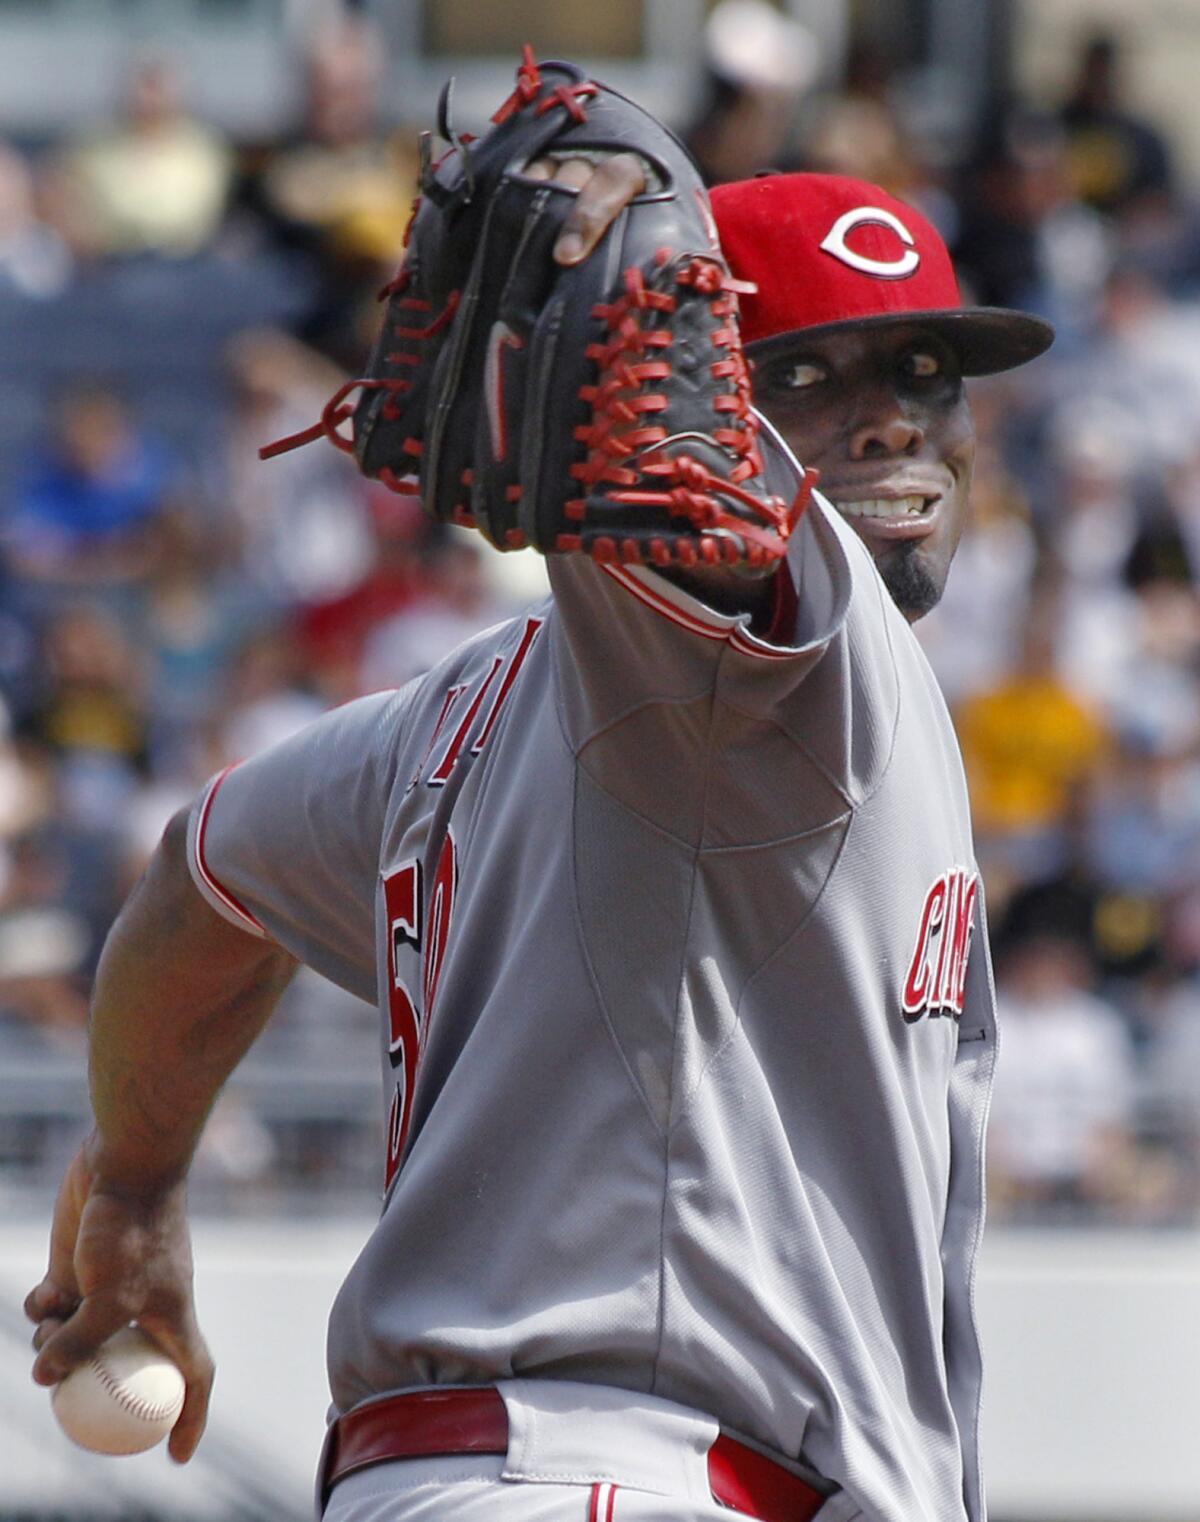 Cincinnati Reds starting pitcher Dontrelle Willis winds up against the Pittsburgh Pirates in the first inning.